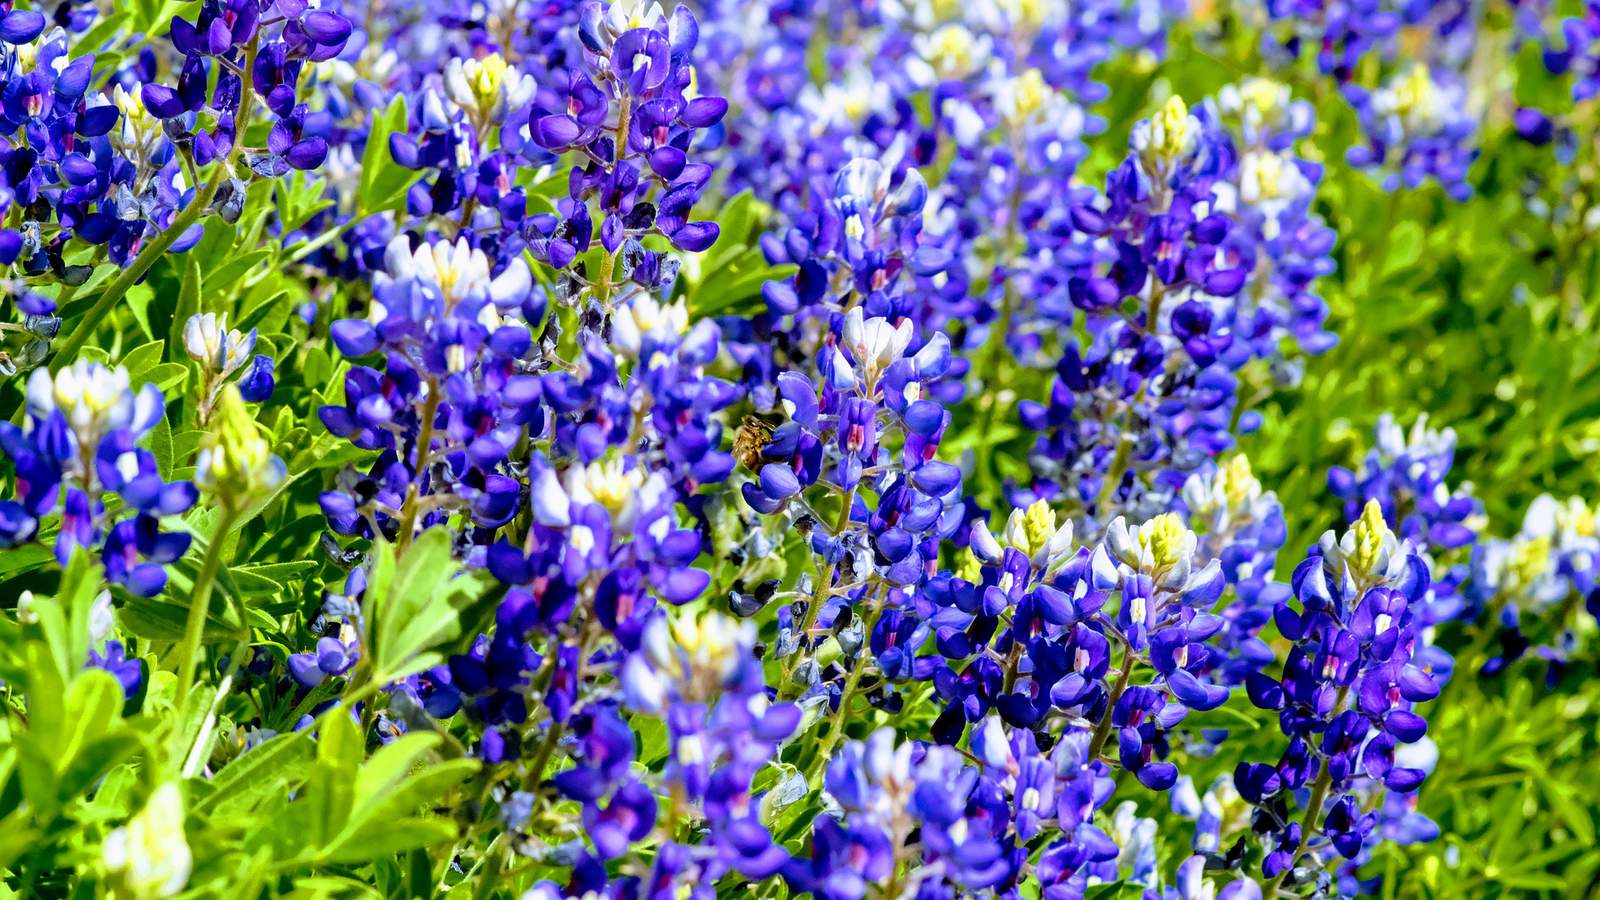 8 of the best places to see bluebonnets in the Houston area